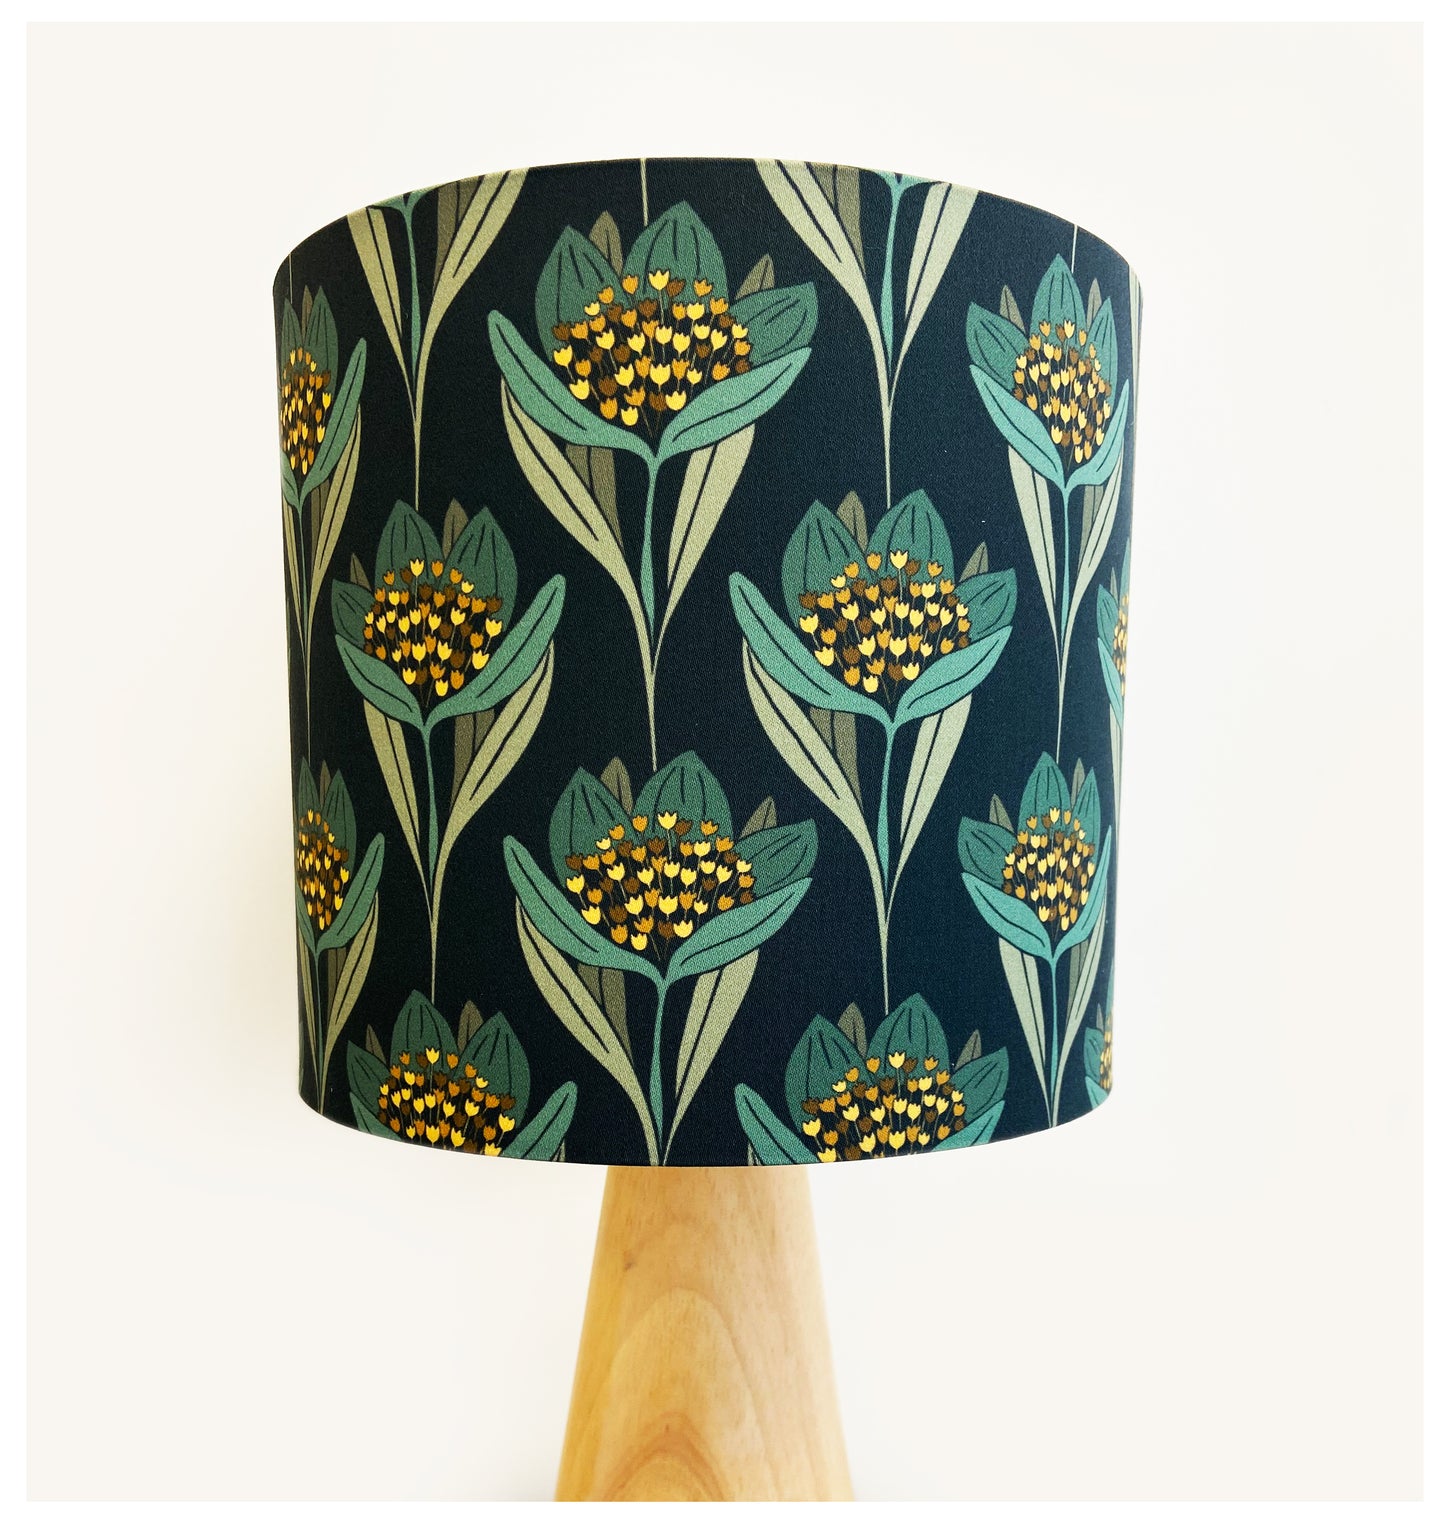 HAPPY FLOWER (muted teal & gold) Lampshade